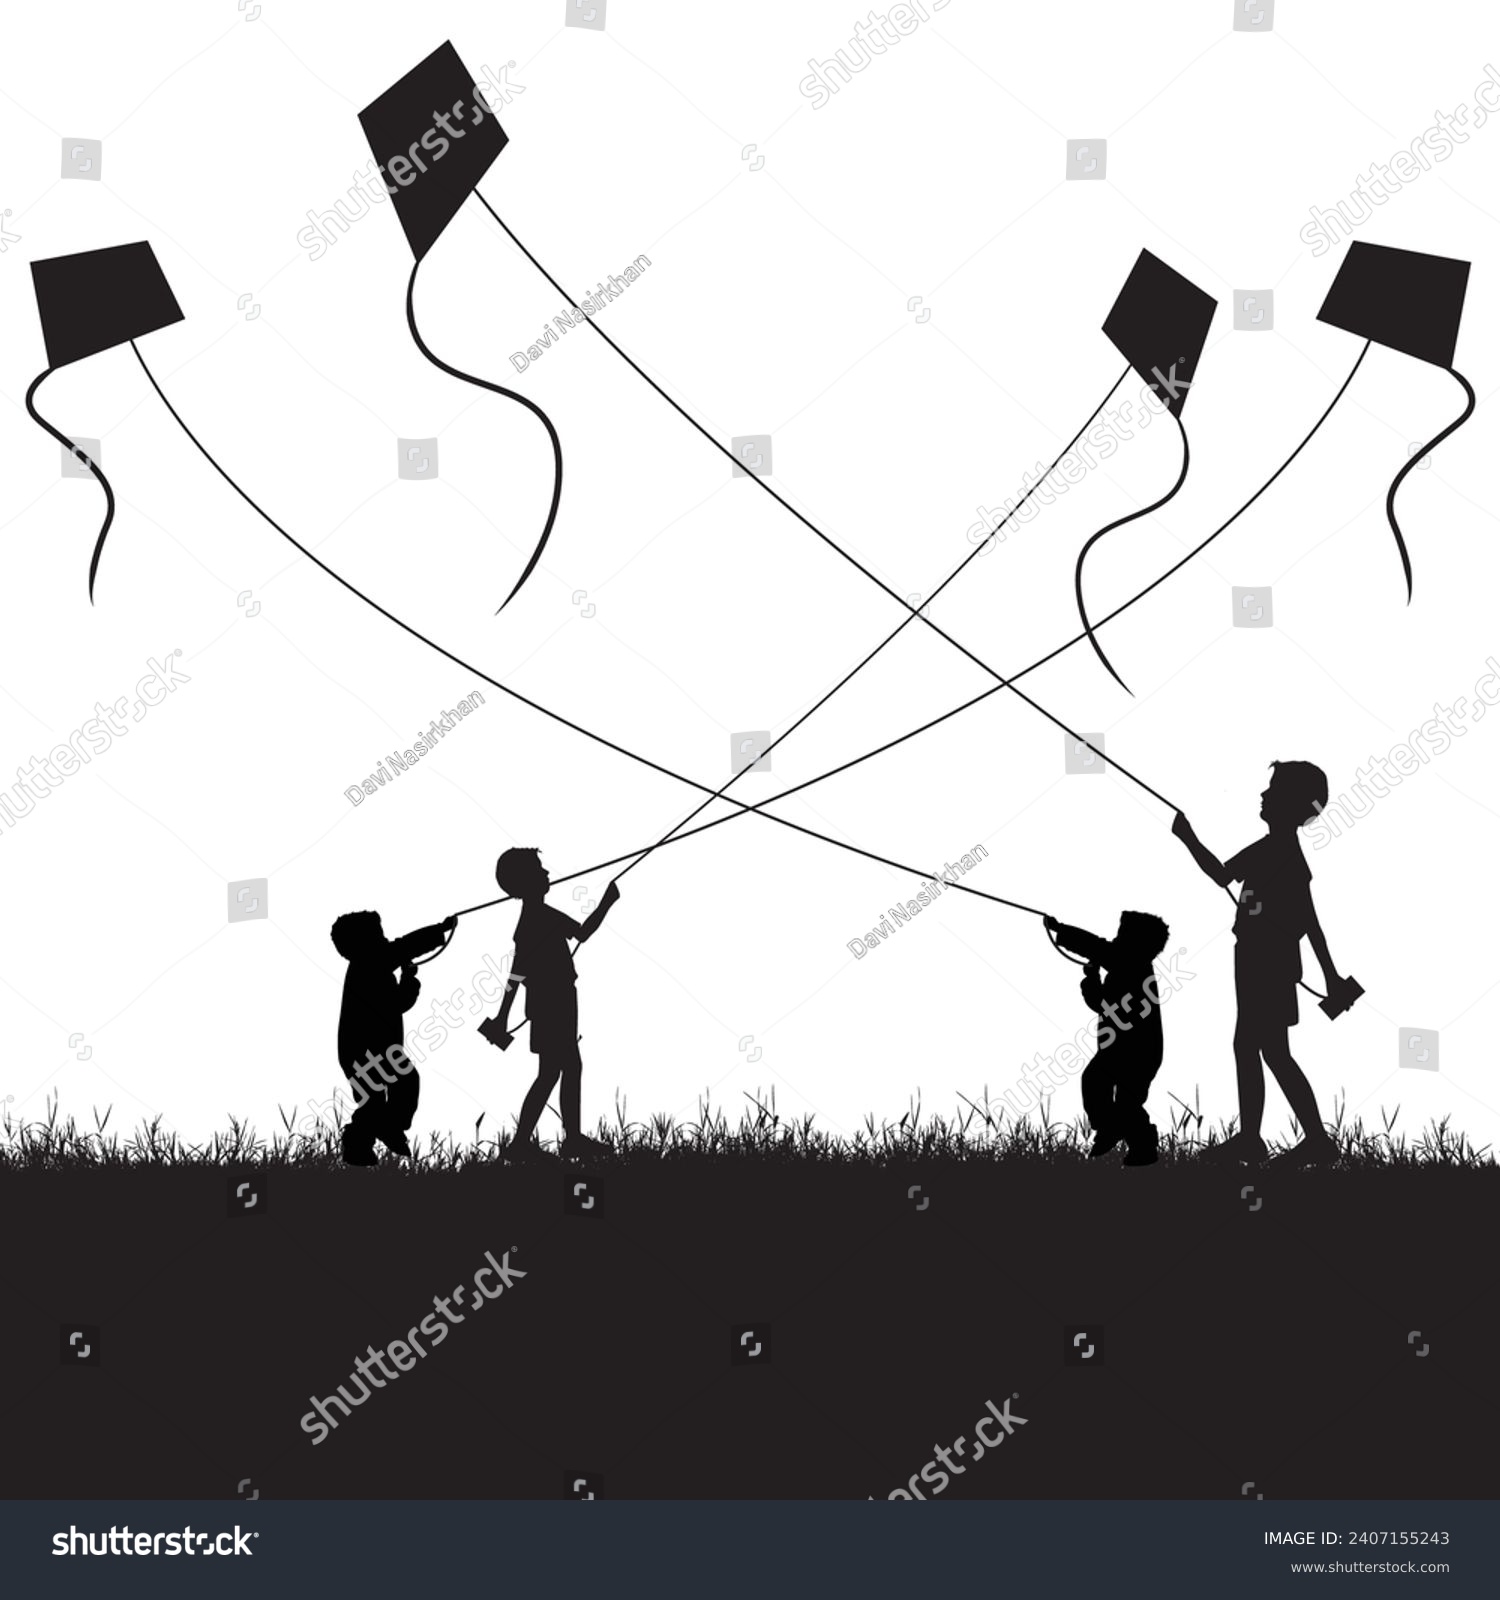 SVG of Silhouettes Soaring: Makar Sankranti's Kite-Flying Delight, This captivating vector celebrates Makar Sankranti with silhouettes of children immersed in the thrill of kite-flying. svg